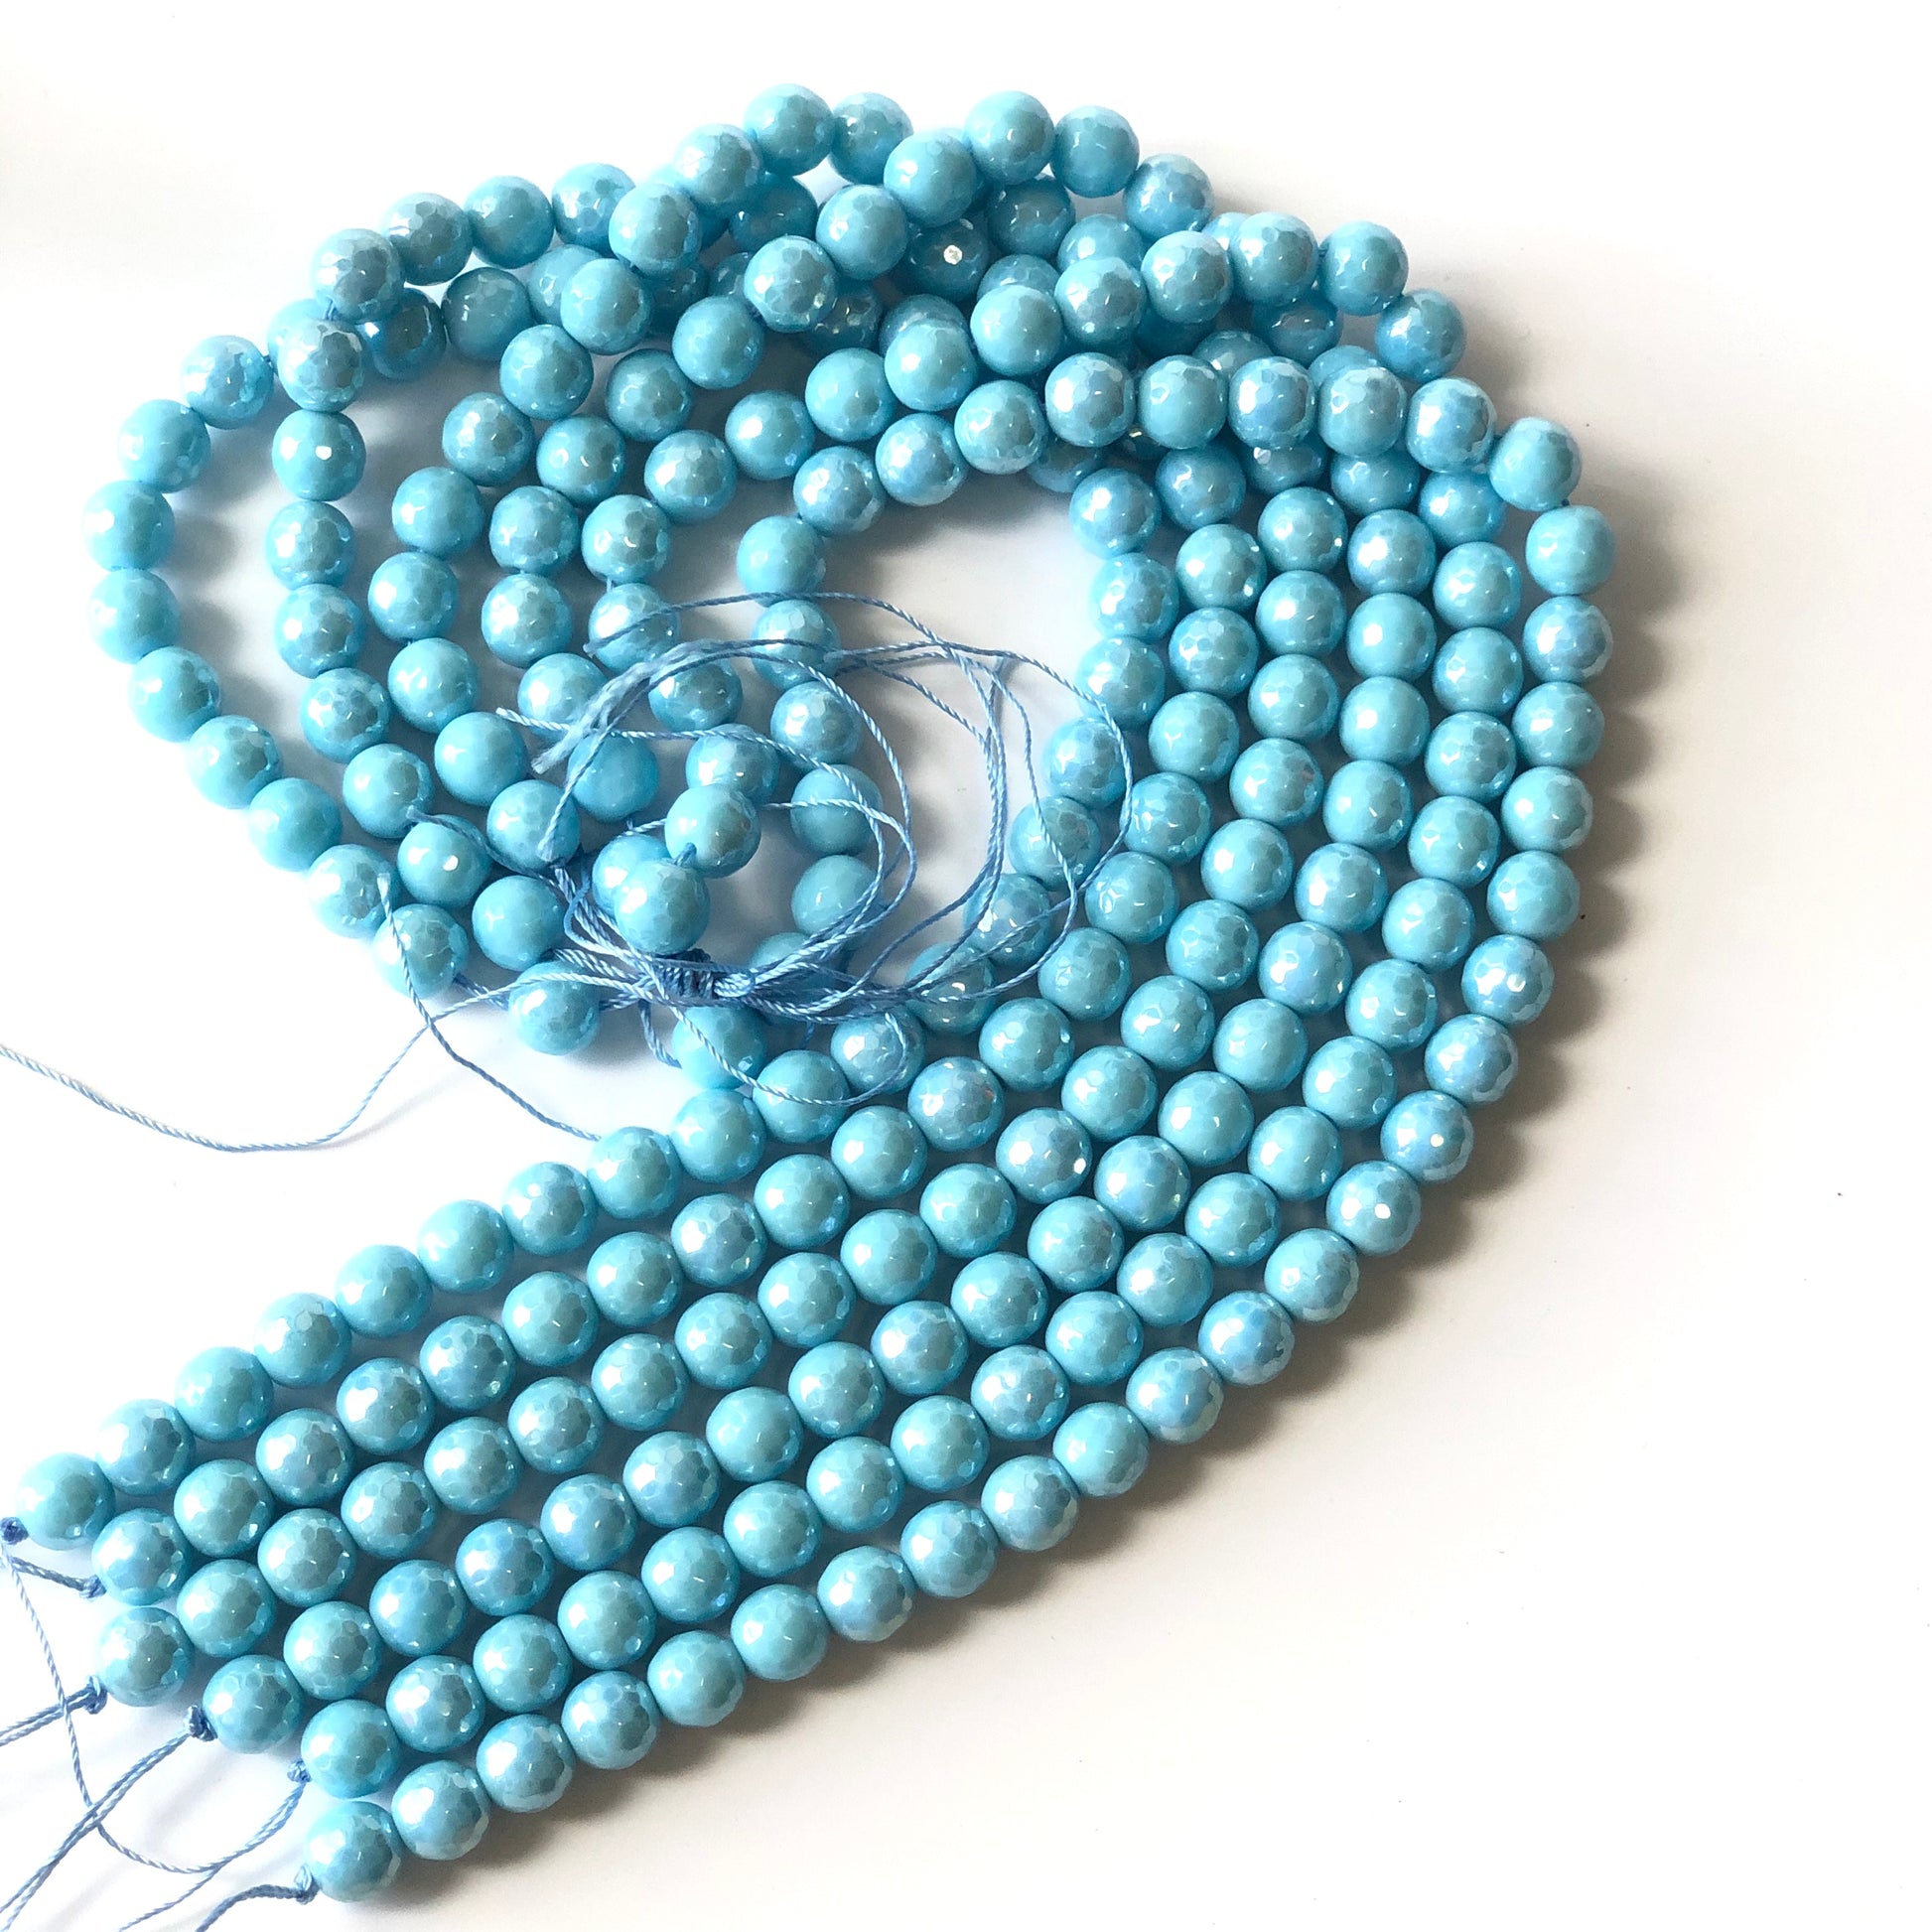 2 Strands/lot 10mm Light Turquoise Electroplated Faceted Jade Stone Beads Electroplated Beads Electroplated Faceted Jade Beads Charms Beads Beyond